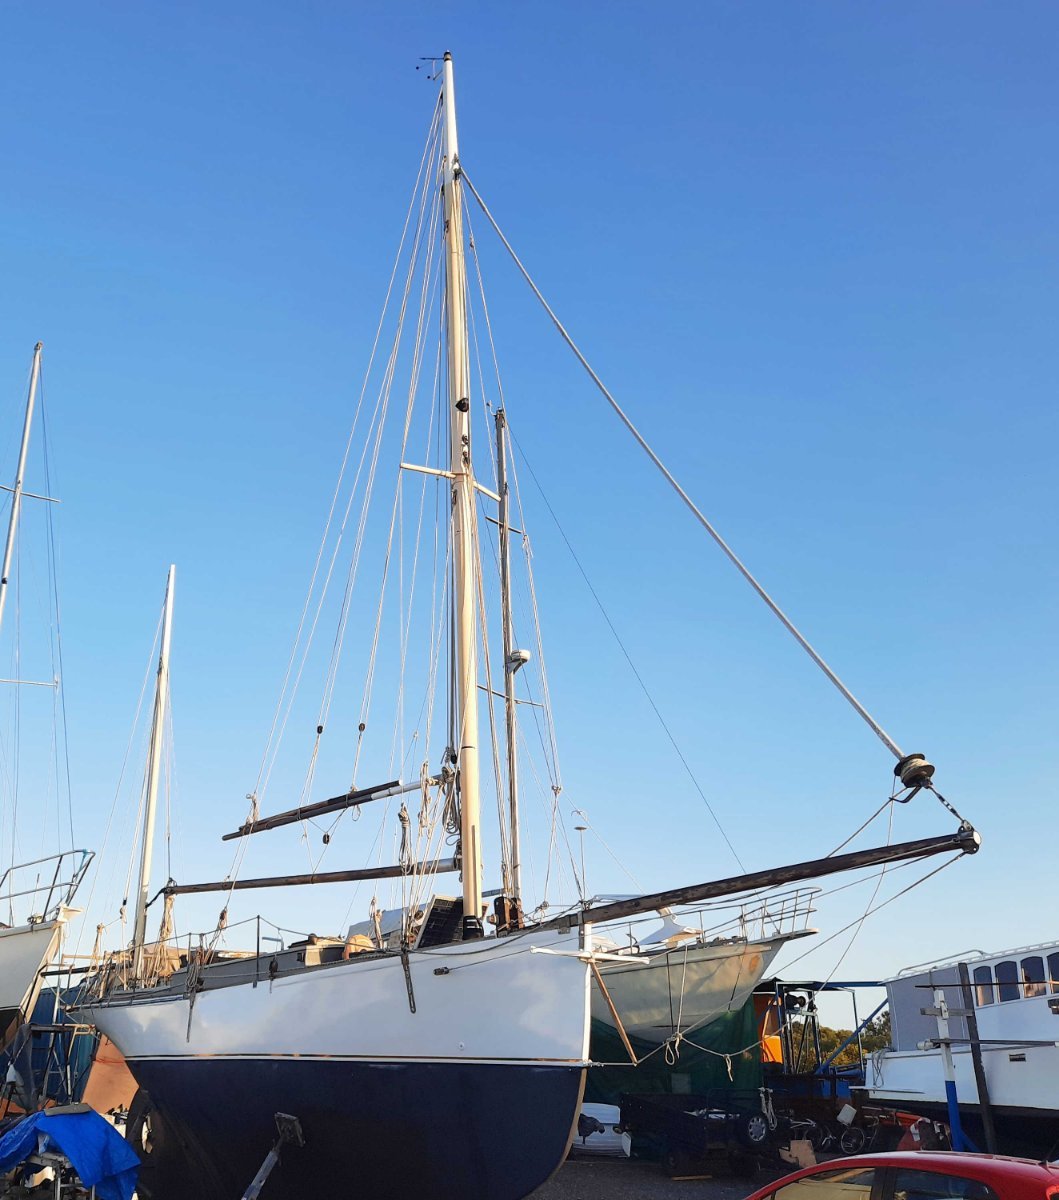 gaff rigged yachts for sale uk